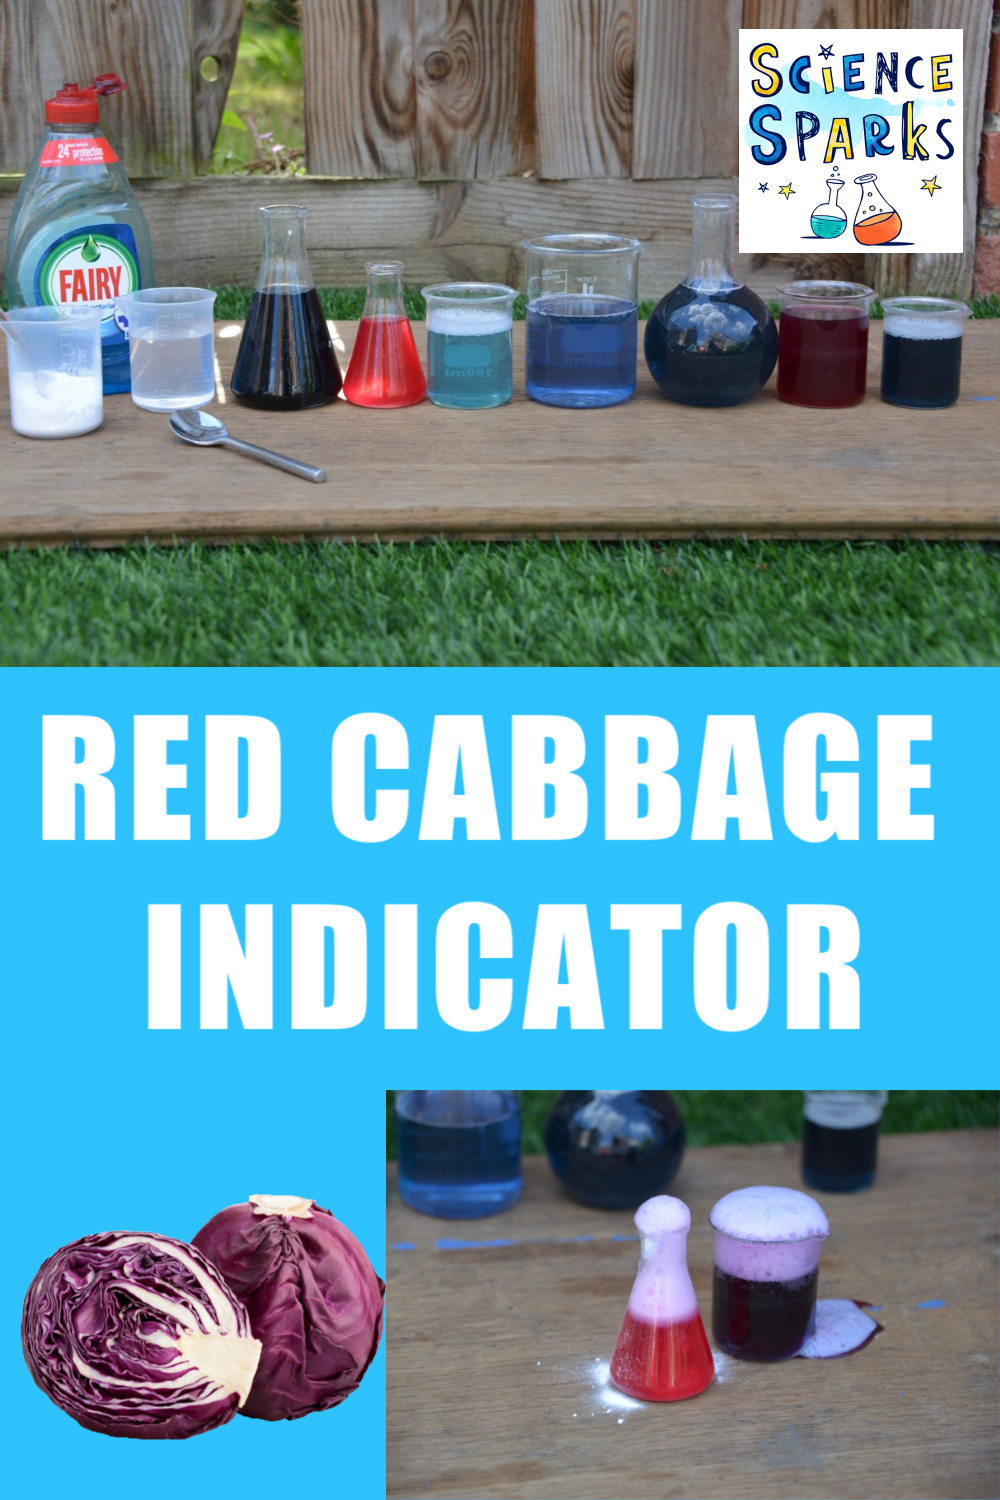 red cabbage indicator experiment instructions